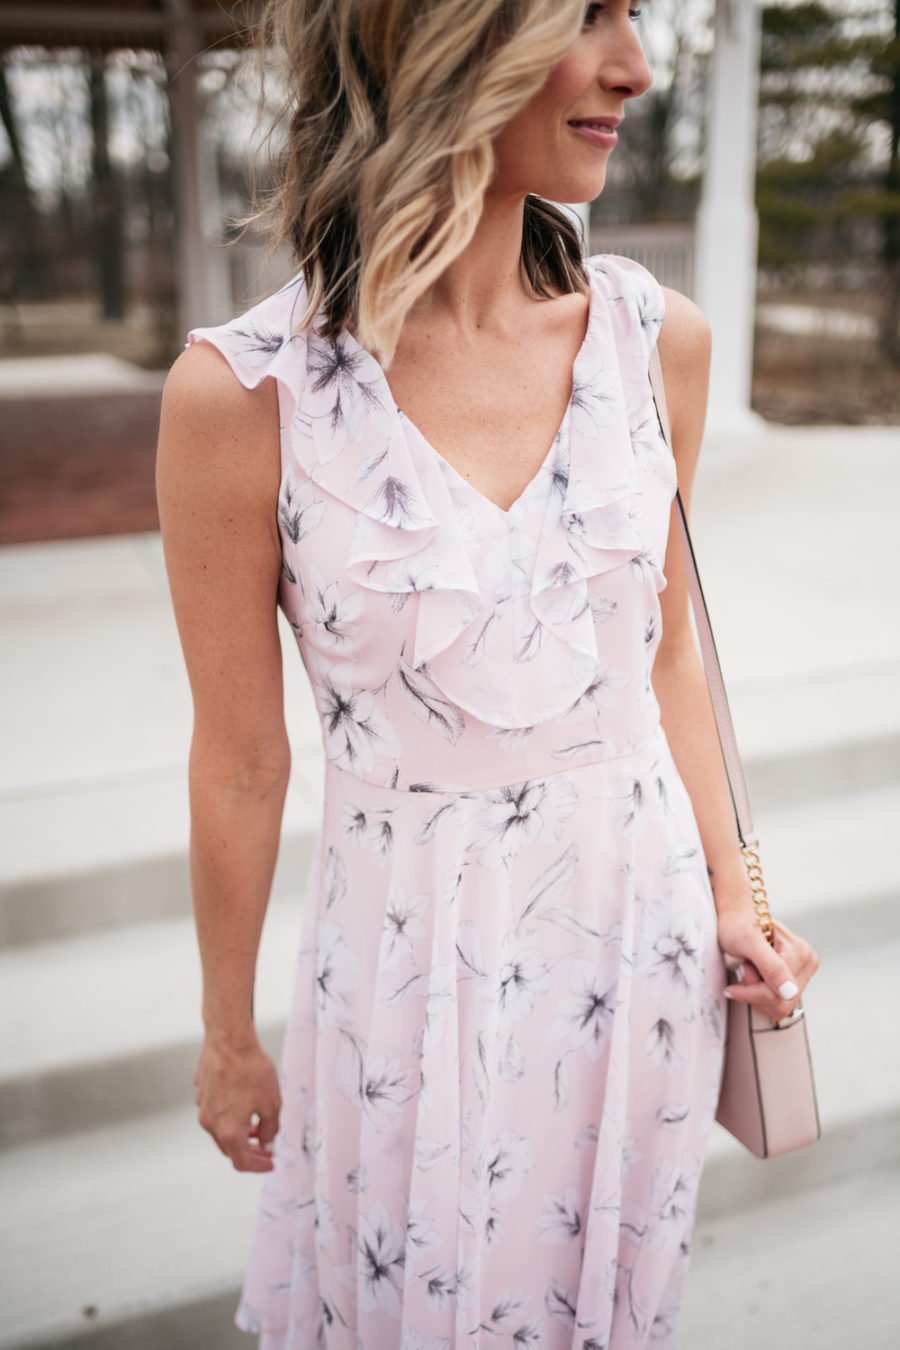 Purple floral party dress, nude strappy heels, cross body bag